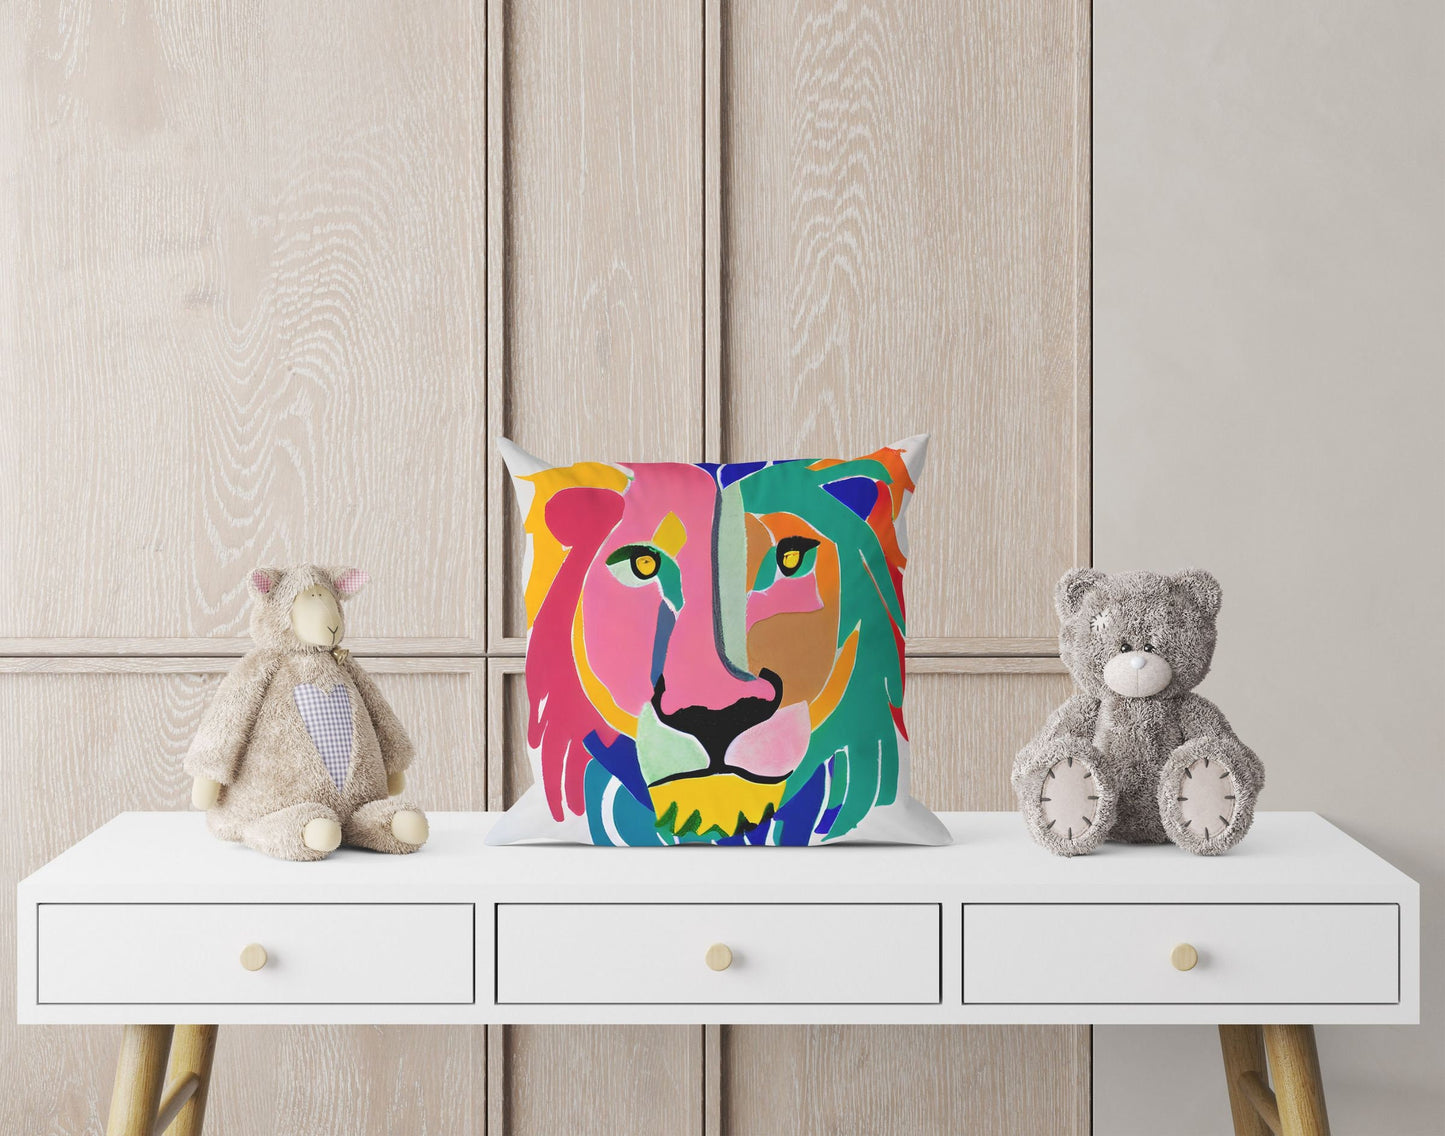 Original Art African Wildlife Lion King Throw Pillow, Abstract Throw Pillow Cover, Comfortable, Colorful Pillow Case, Square Pillow